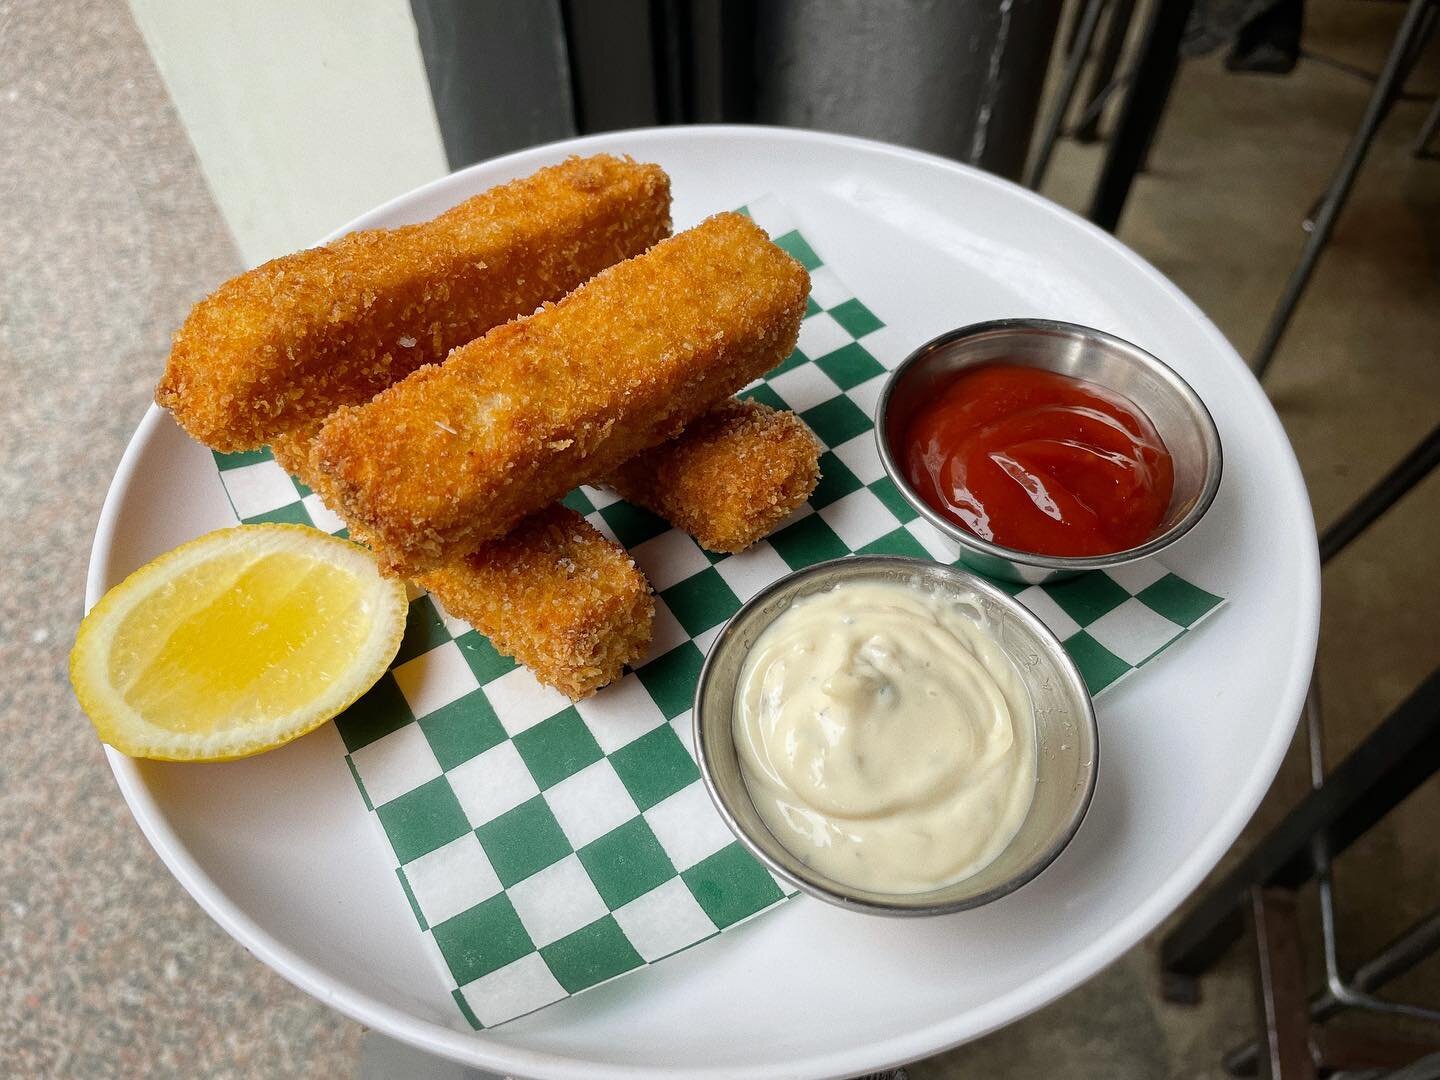 *Les Poissons from The Little Mermaid plays softly in the distance *⁣
⁣
New staff fave bar snack quietly hit the menu this weekend: Fish Sticks!! Panko breaded smoked Atlantic cod, spicy ketchup, malt vinegar mayo. 🤌🐟